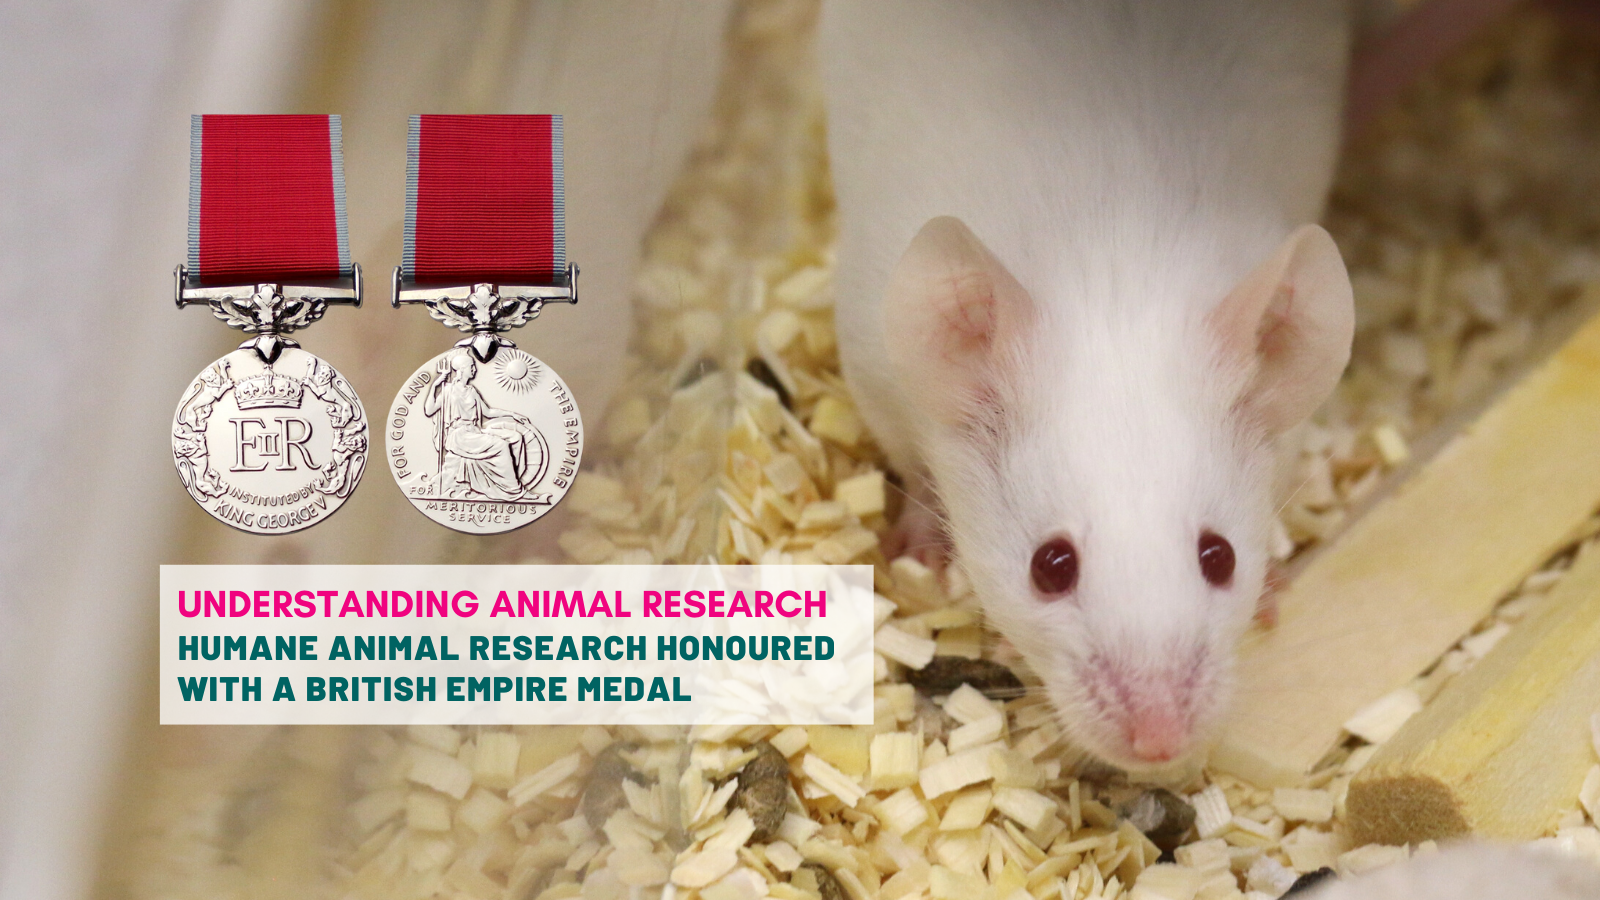 Humane Animal Research honoured with a British Empire Medal